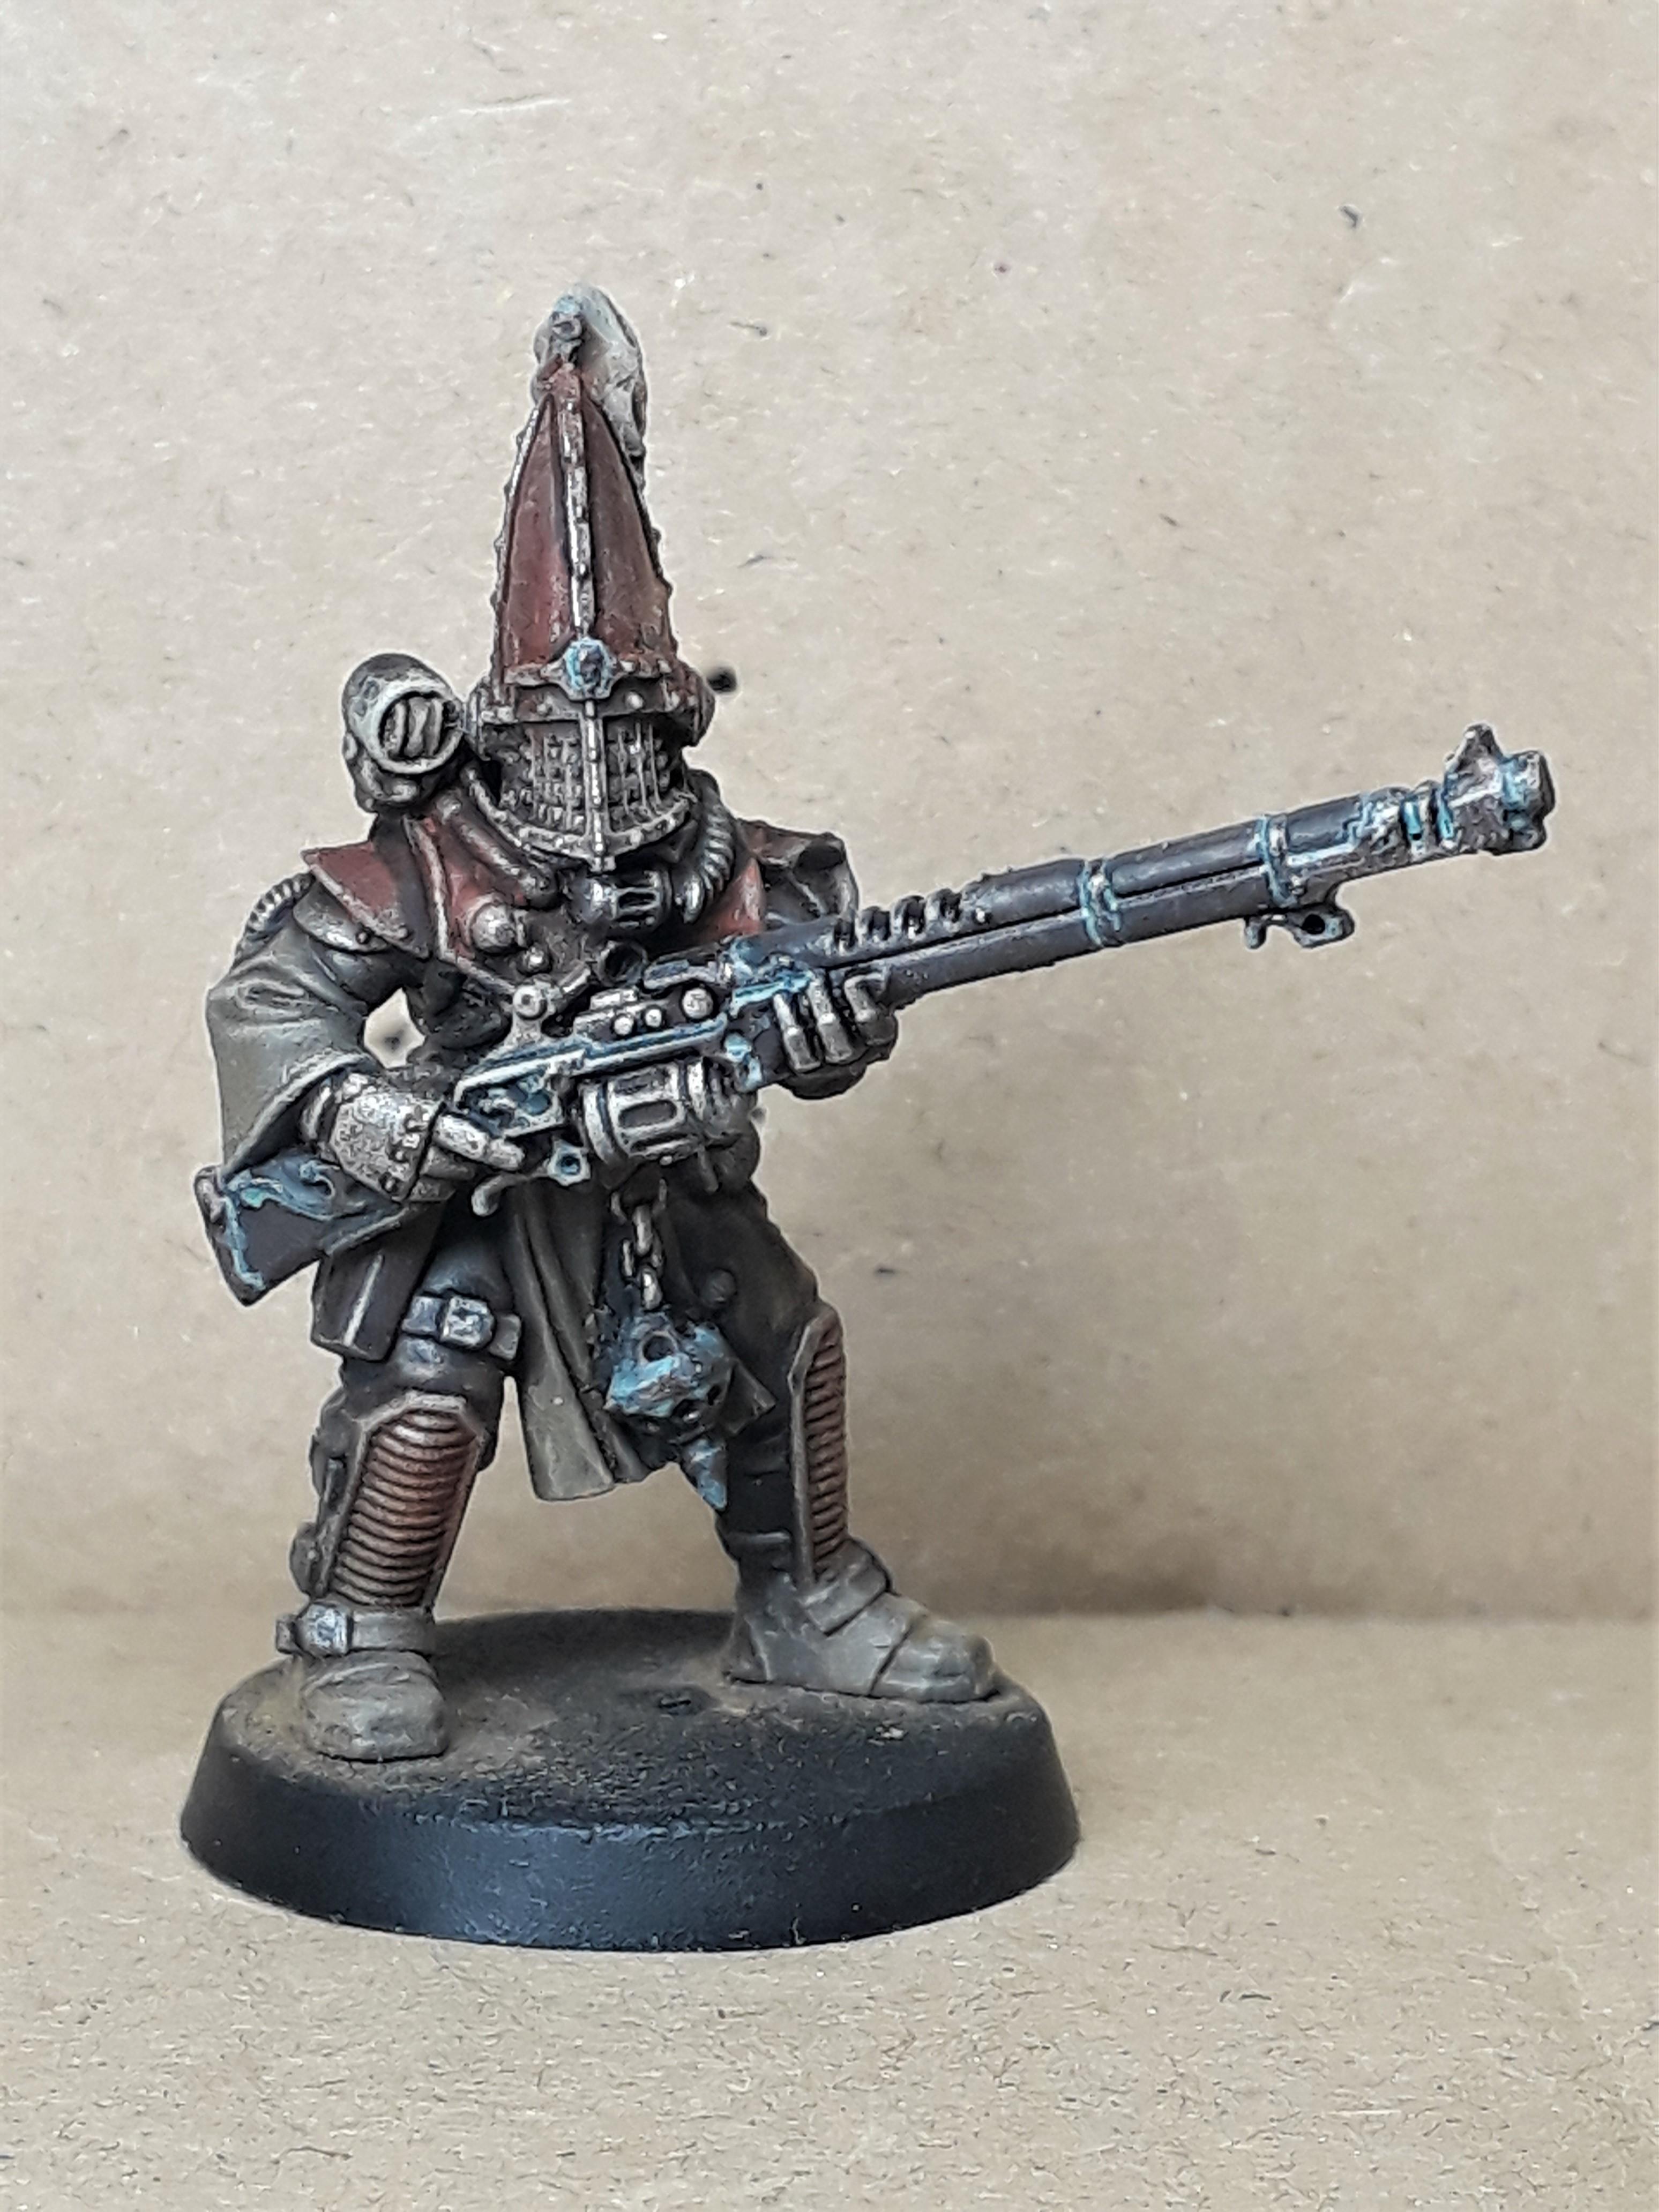 Astra Militarum, Blanchitsu, Dusty, Imperial Guard, Infantry, Pigments, Rusty, Weathered